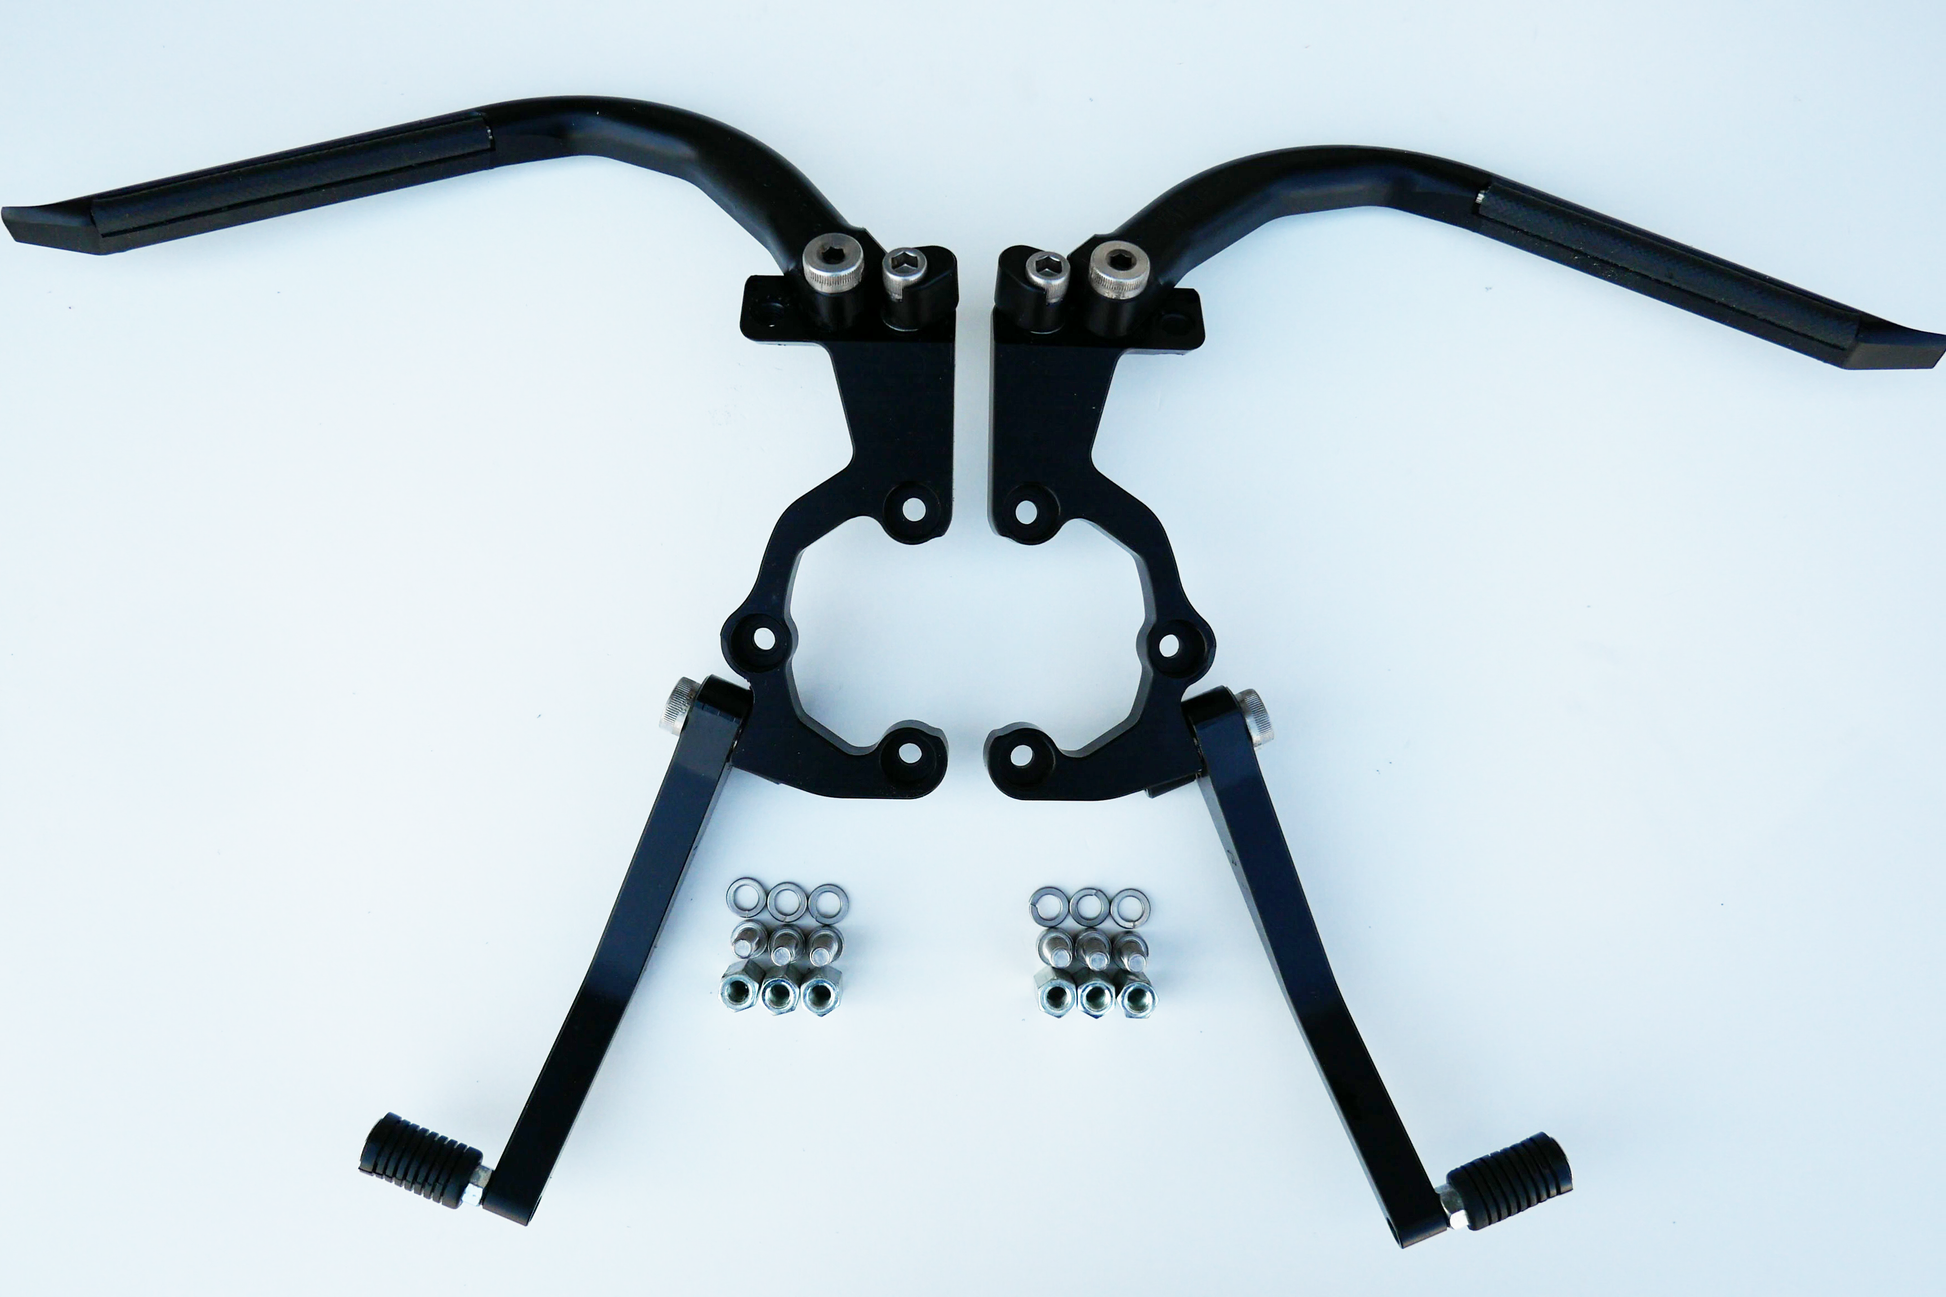 High quality BMW motorcycle highway pegs for BMW R1250R.